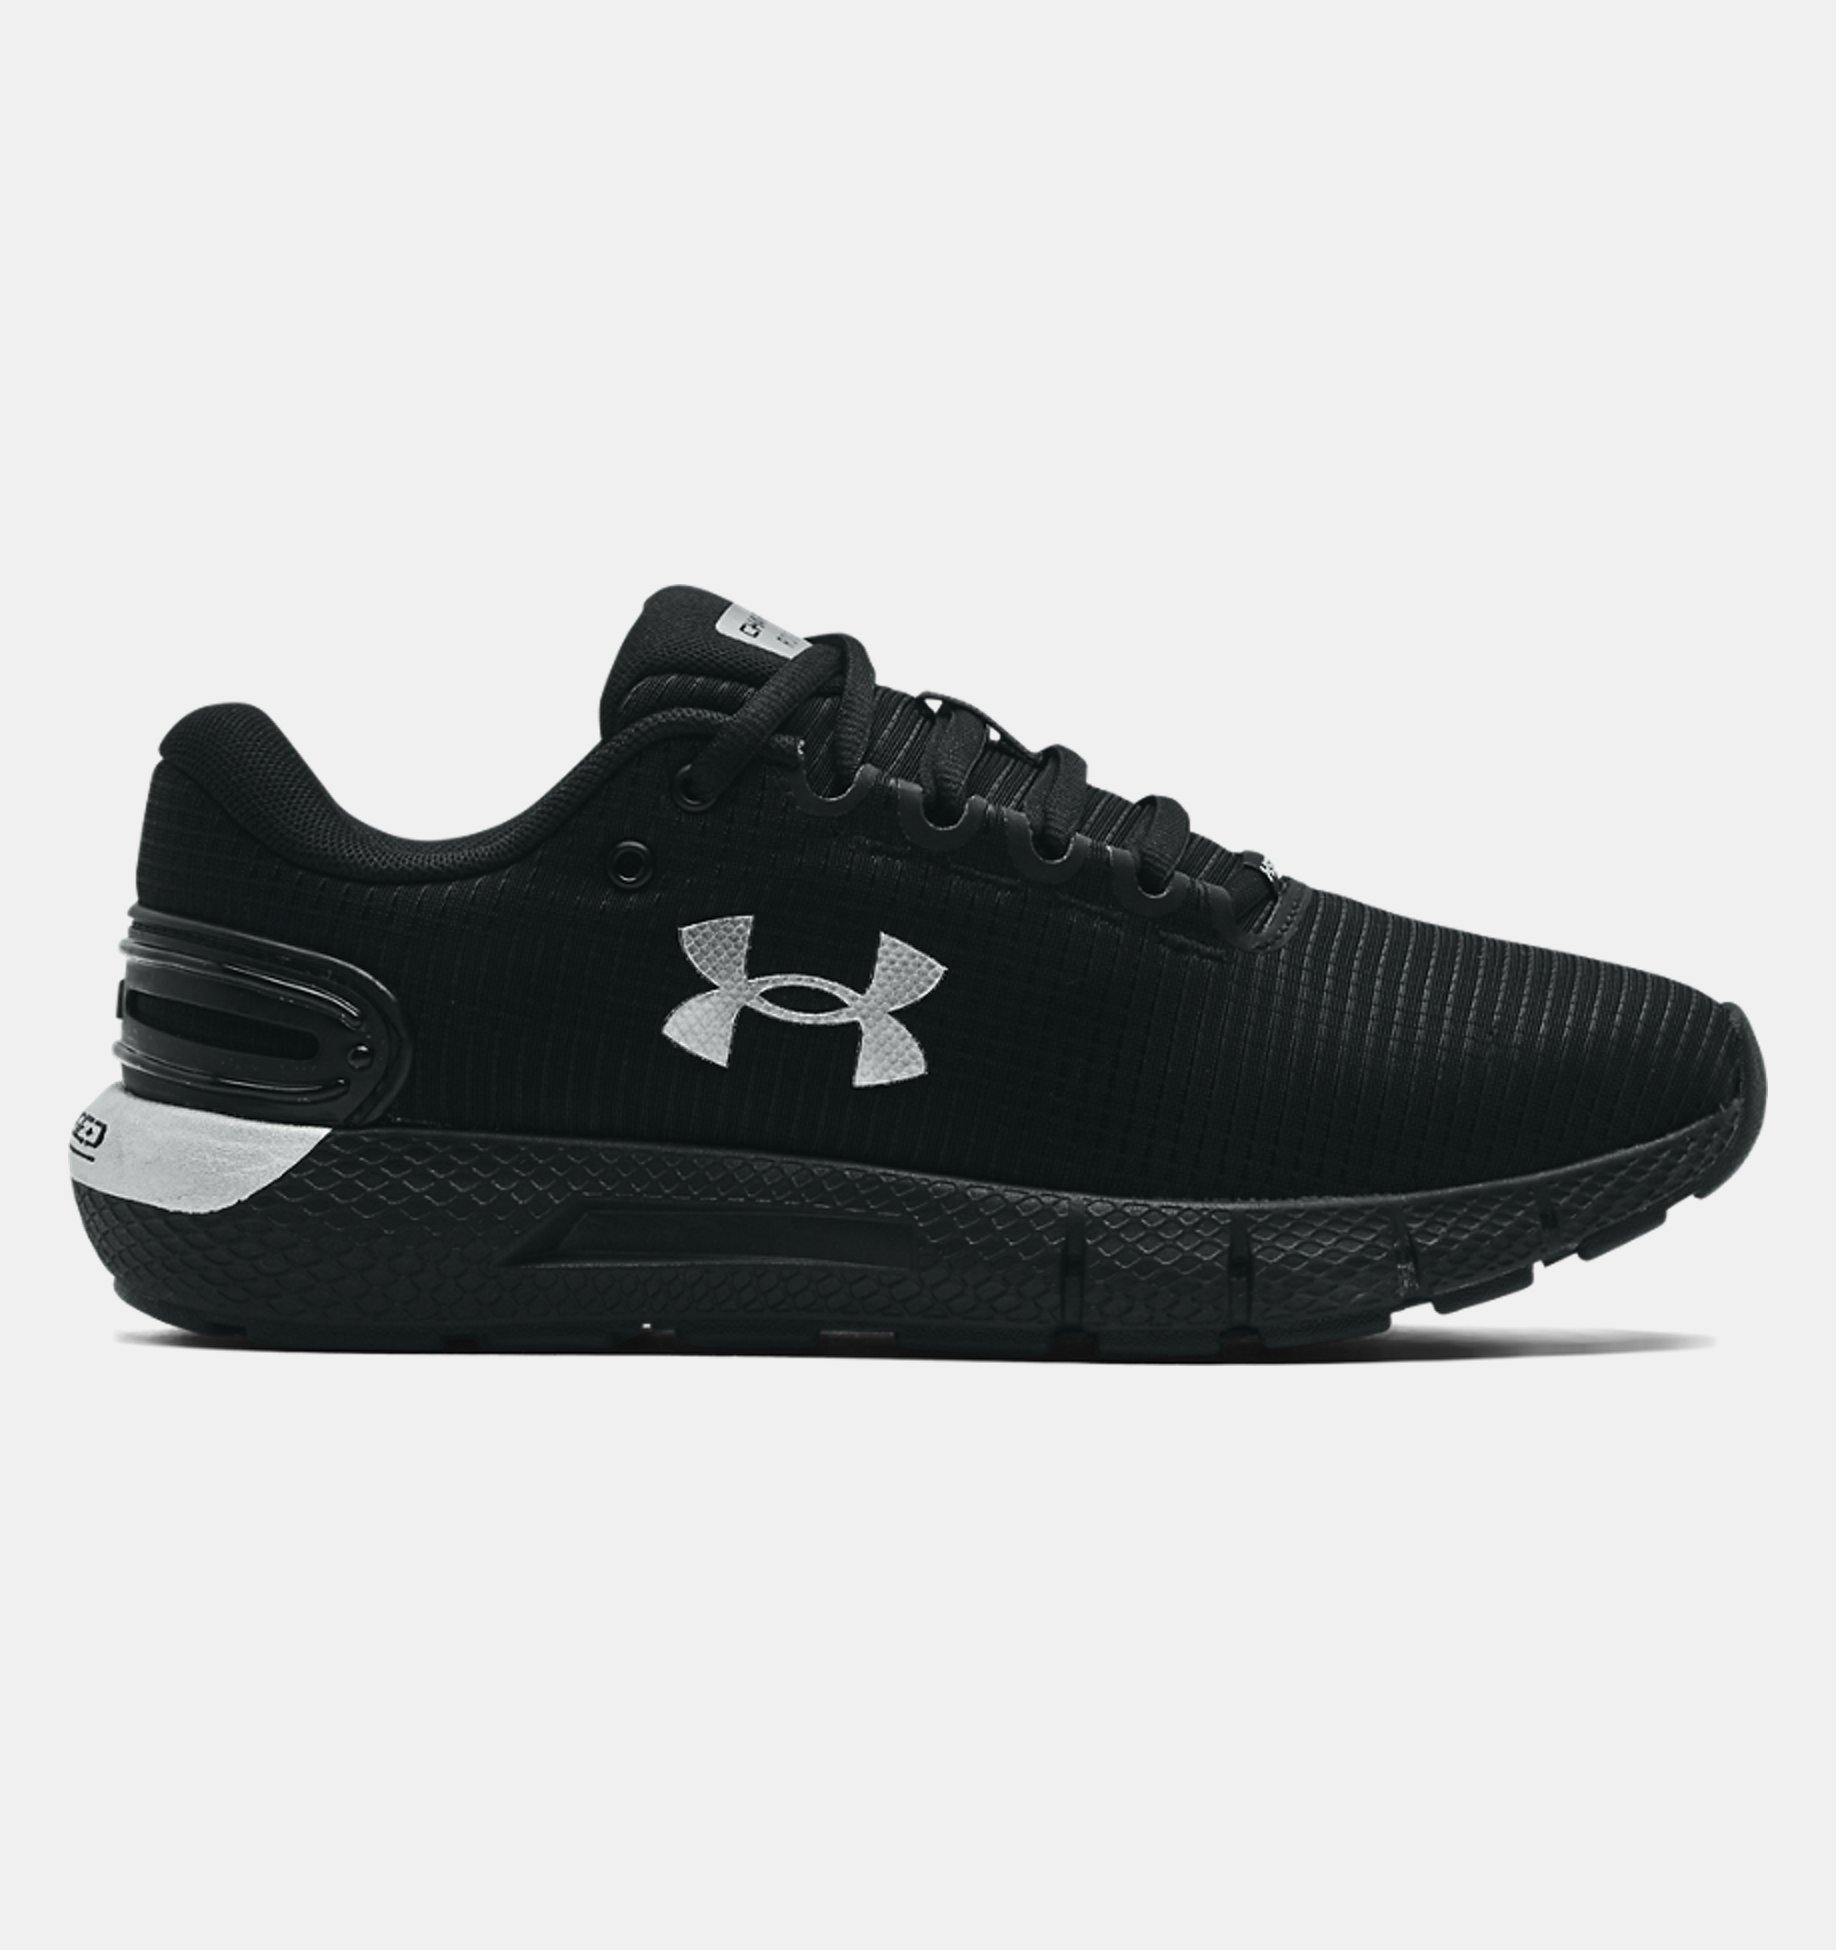 Under Armour Women's Charged Rogue 2.5 Running Shoe 